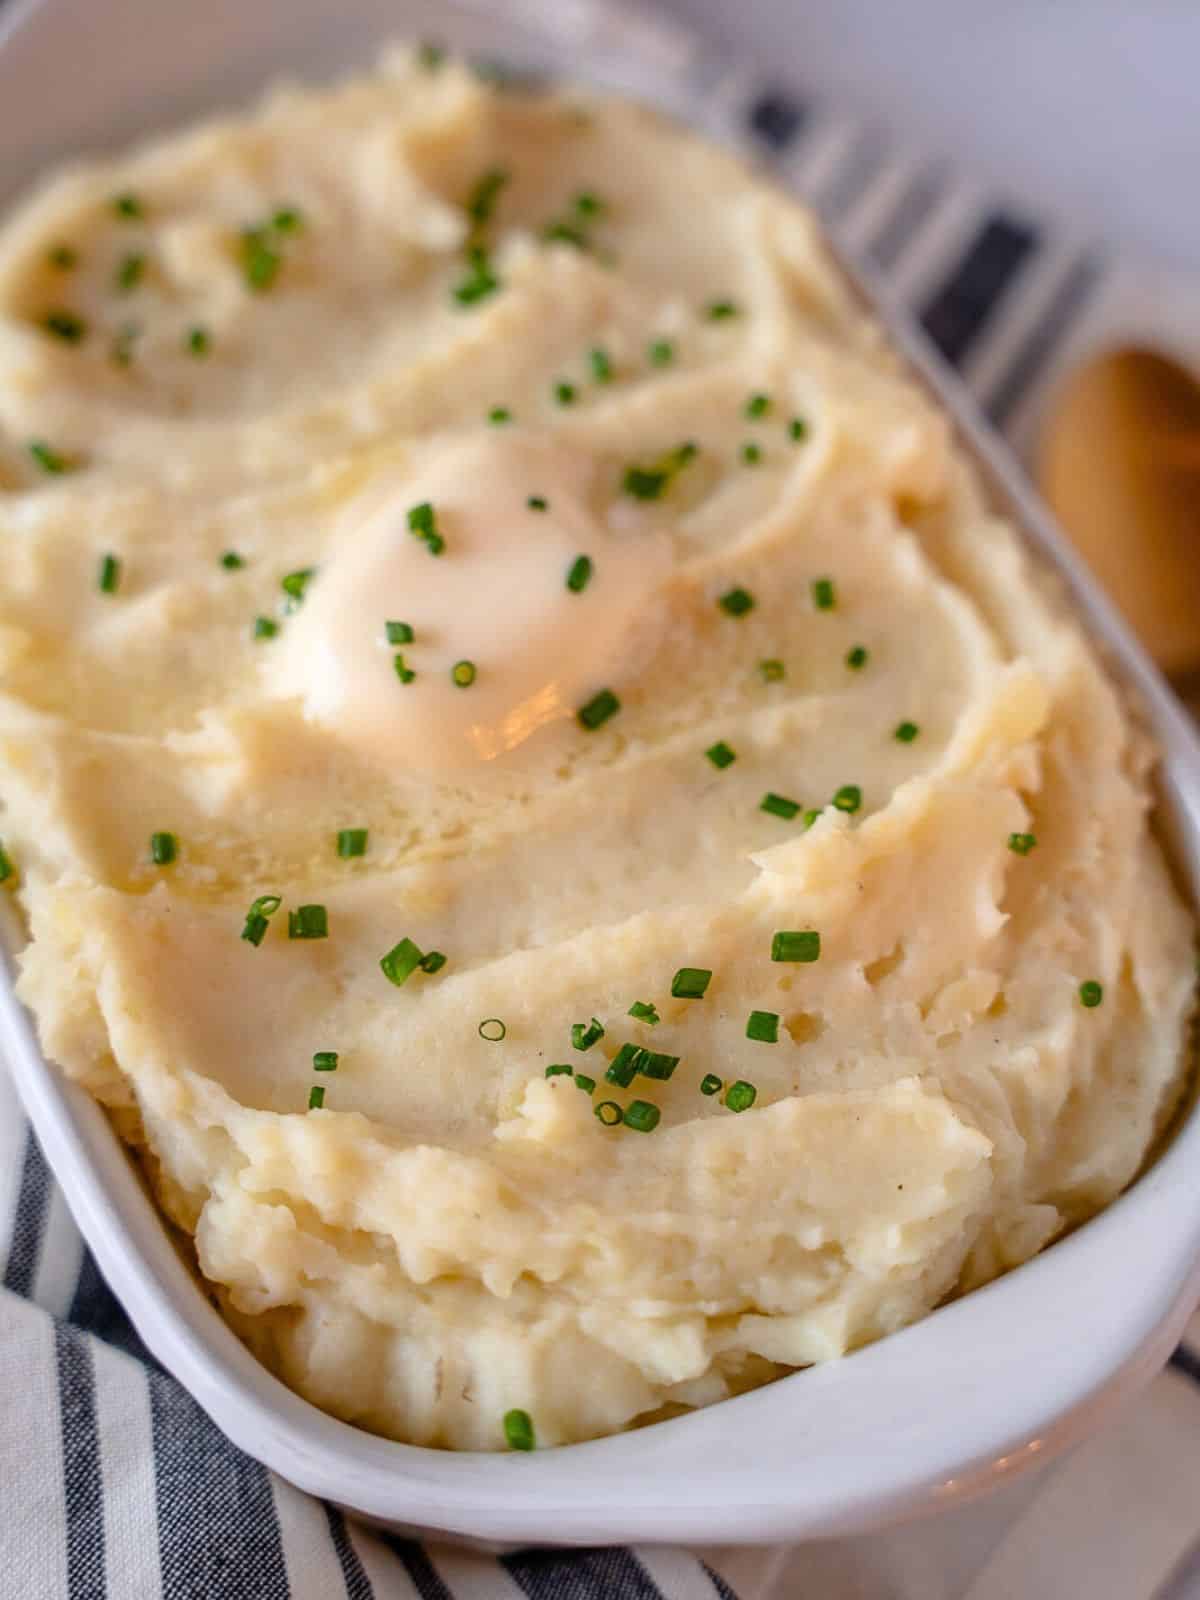 Goat cheese mashed potatoes in a white dish garnished with chives and a pat of butter.